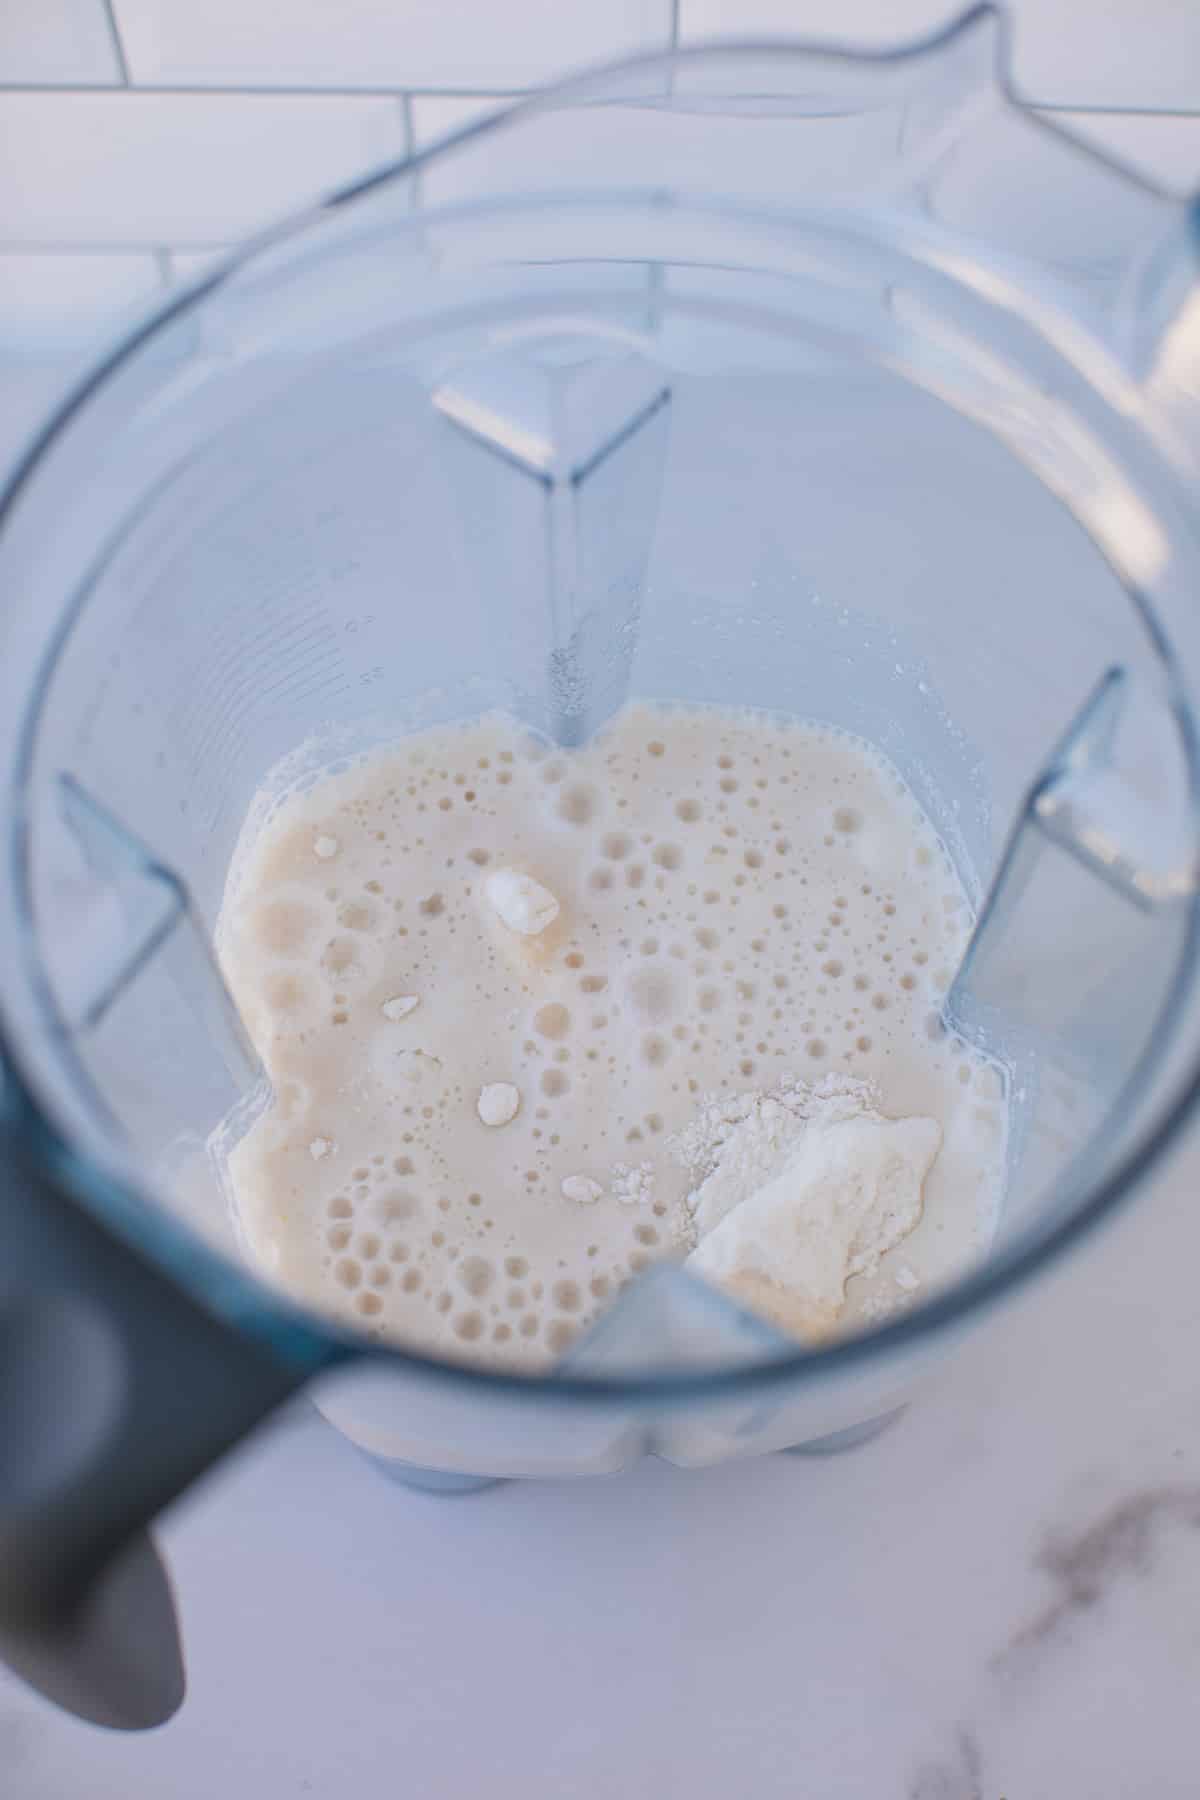 Pancake batter in the pitcher of a blender